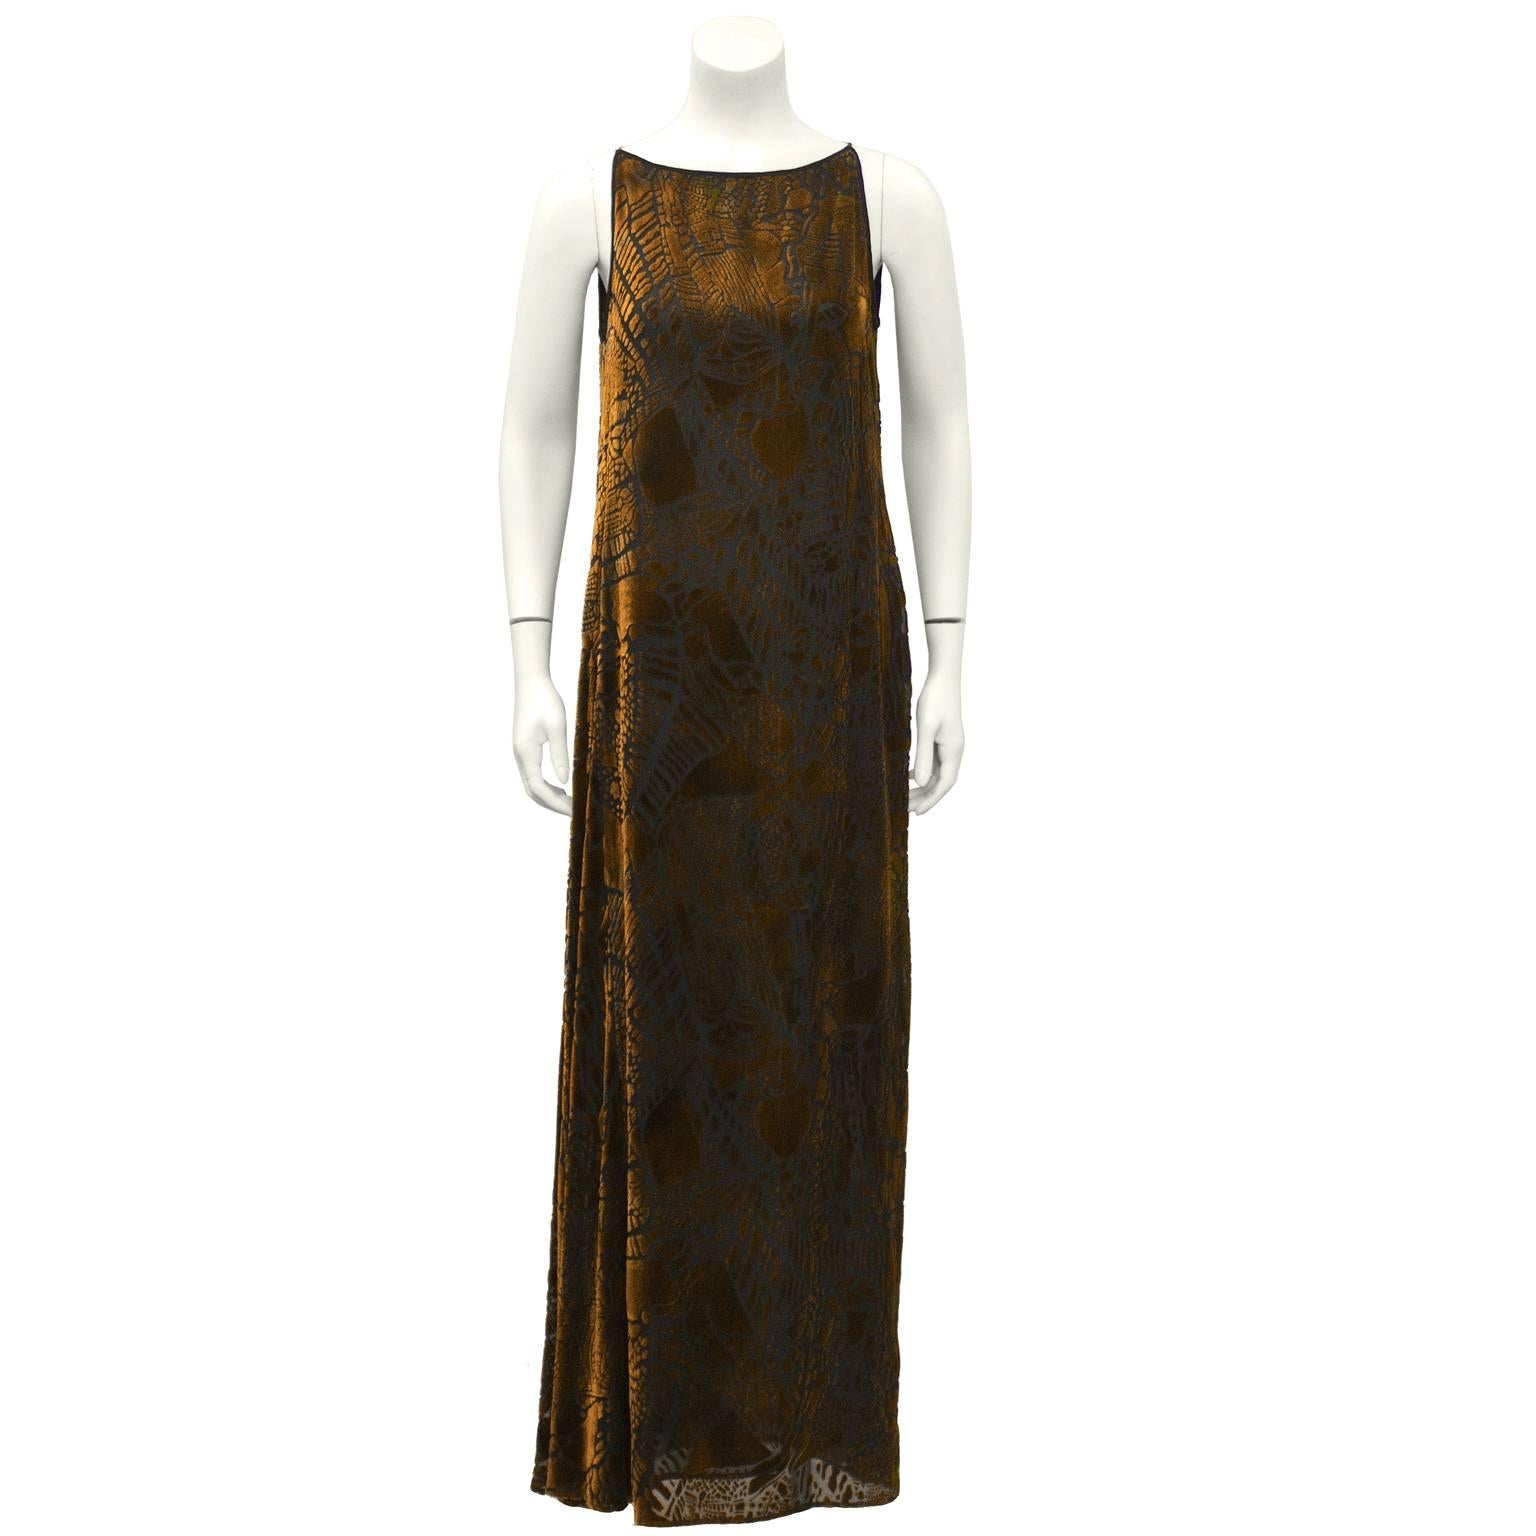 Christian Lacroix late 1980's art deco style bronze and black devoré velvet chemise shaped gown with matching shawl. Sleeveless with boat neckline and skinny non-adjustable shoulder straps. Asymmetrical gather on the right hip. The dress is meant to